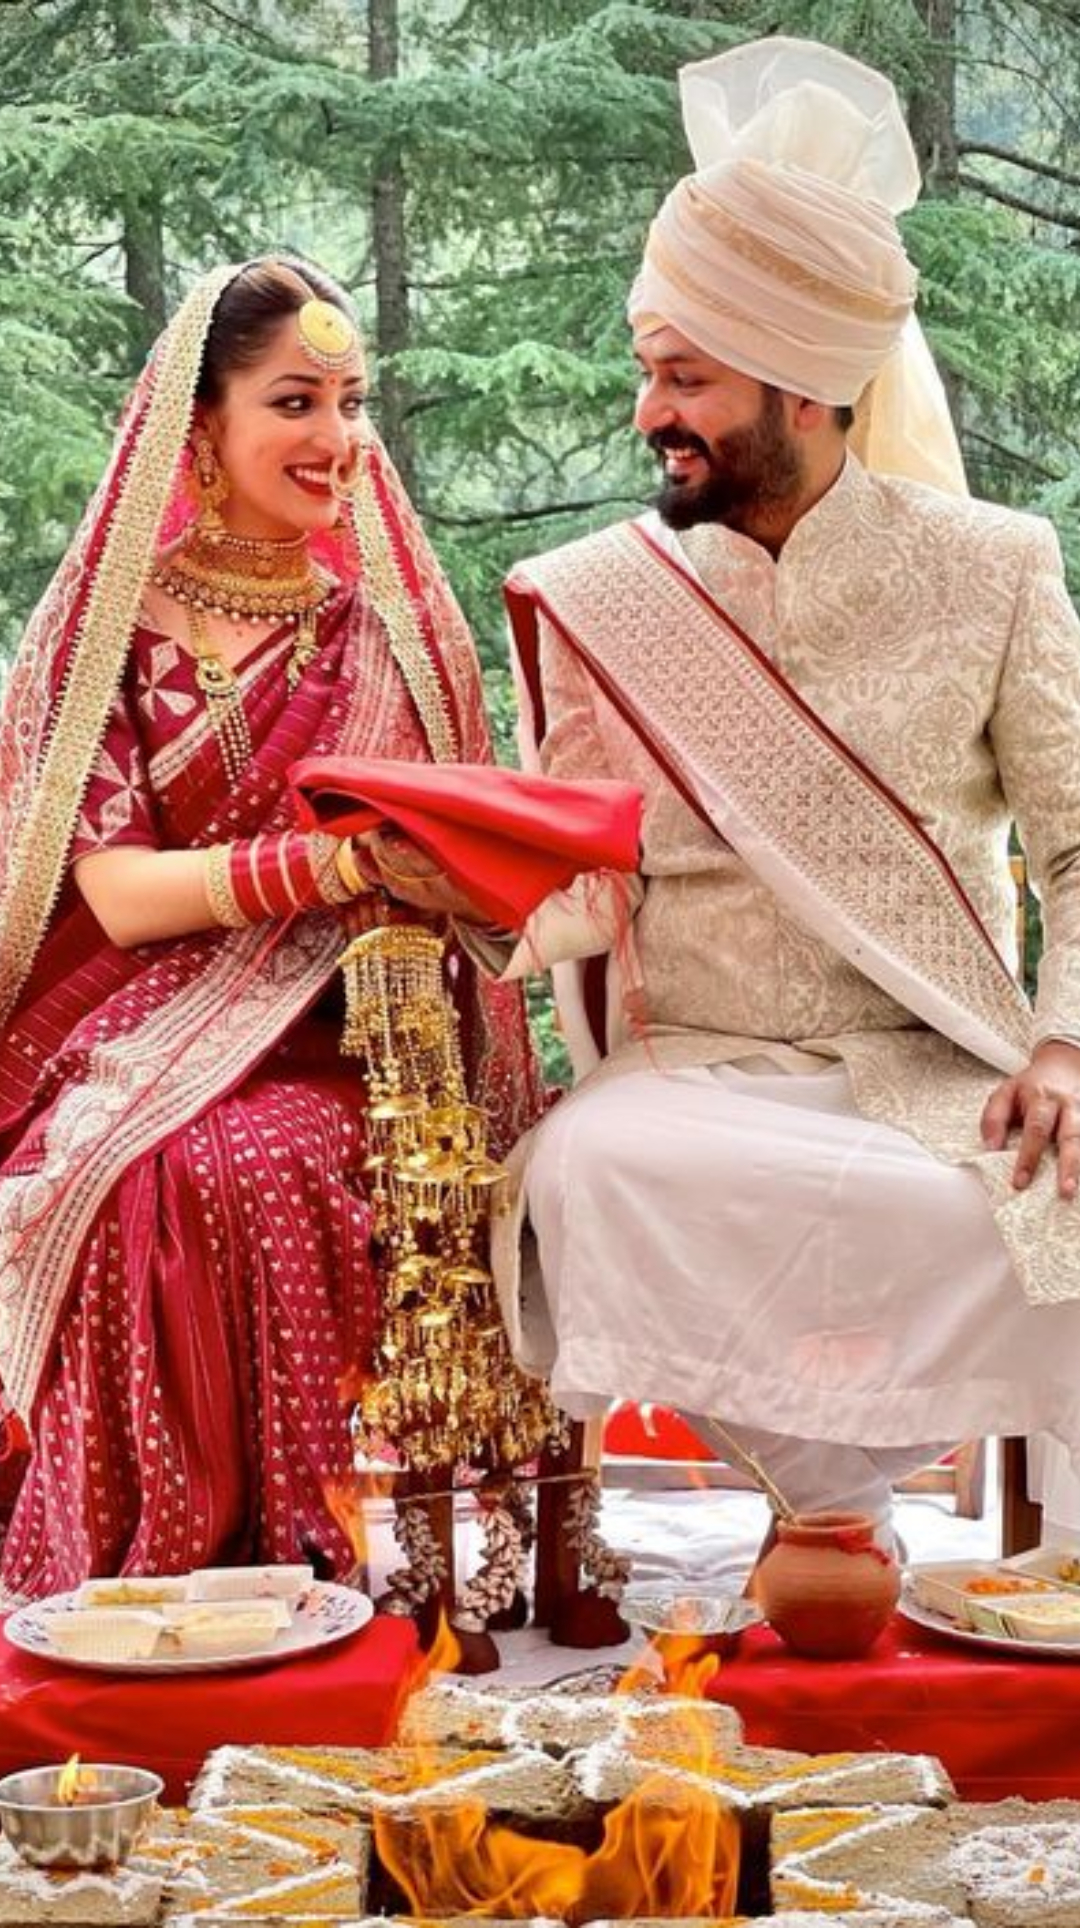 Bollywood celebrities who opted for a simple wedding